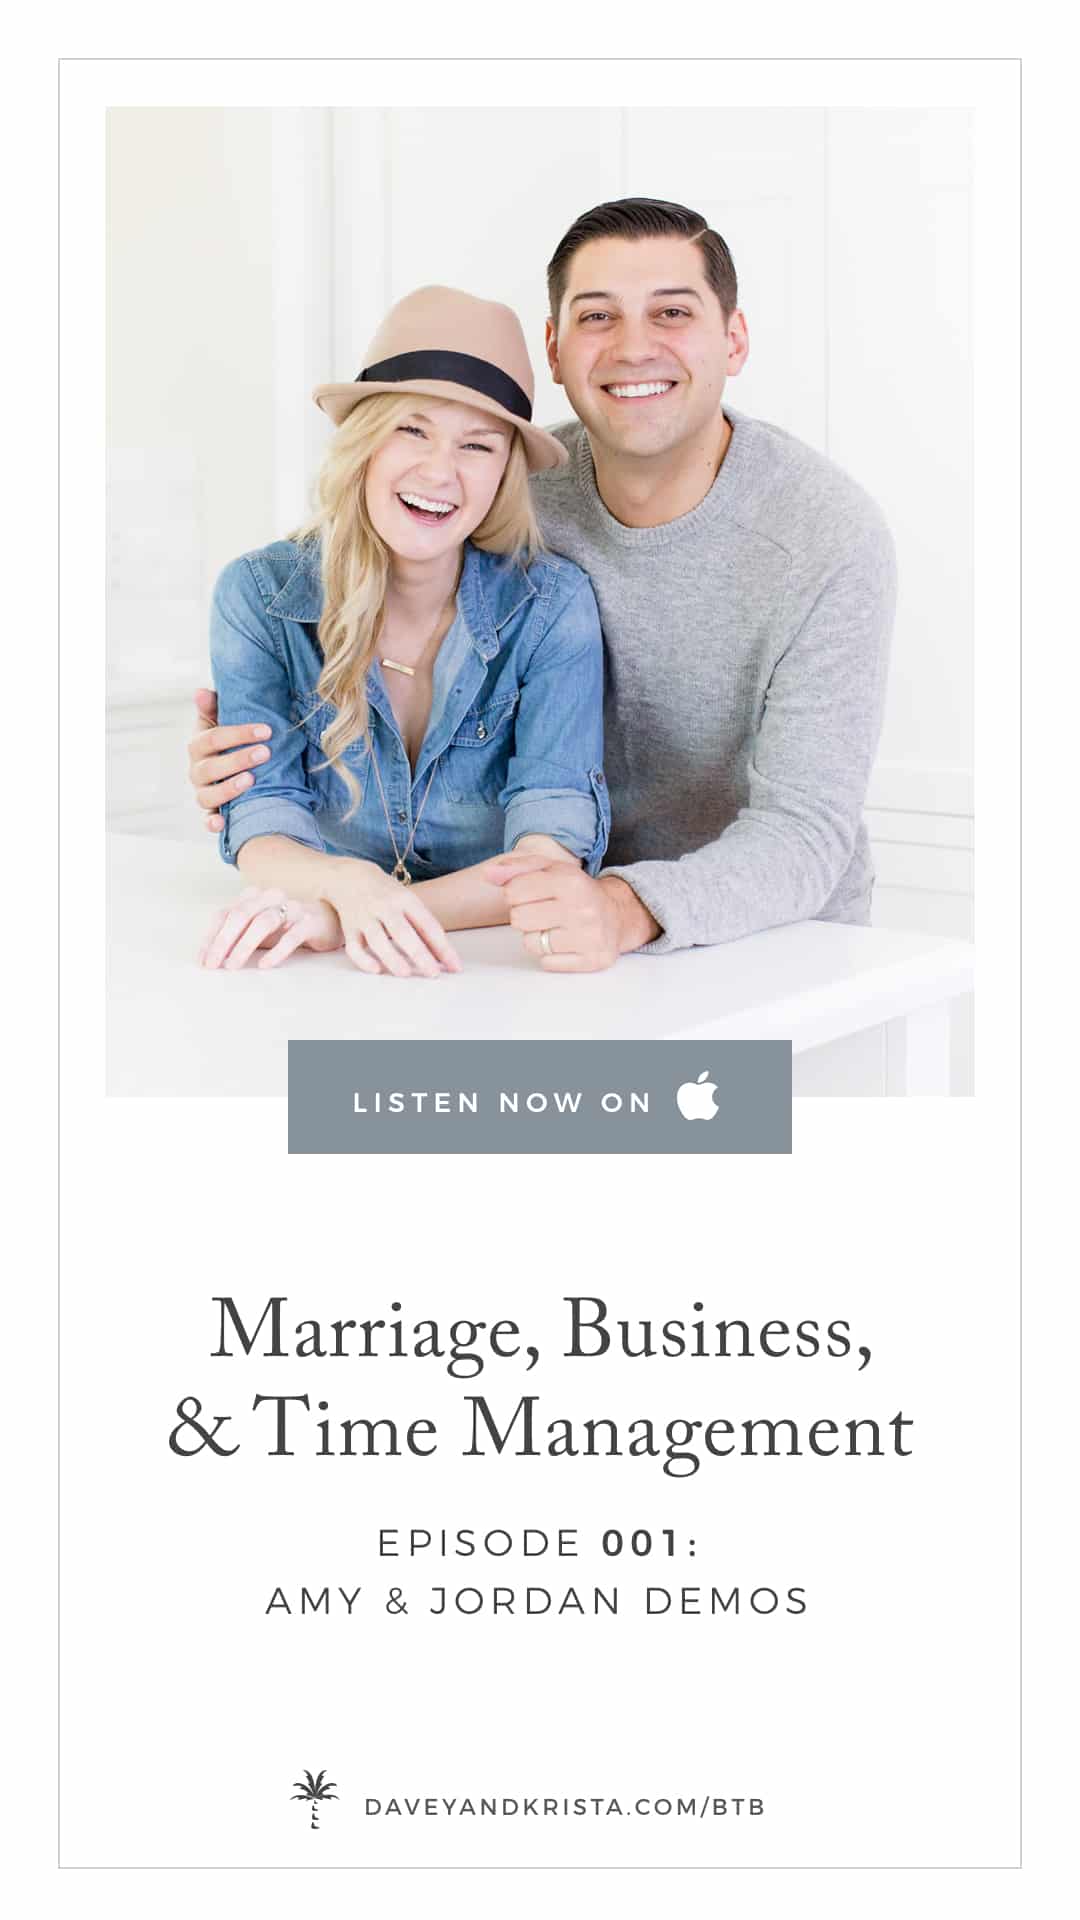 Marriage, Business and Time Management tips with Amy & Jordan Demos on the Brands that Book Podcast for creative business owners